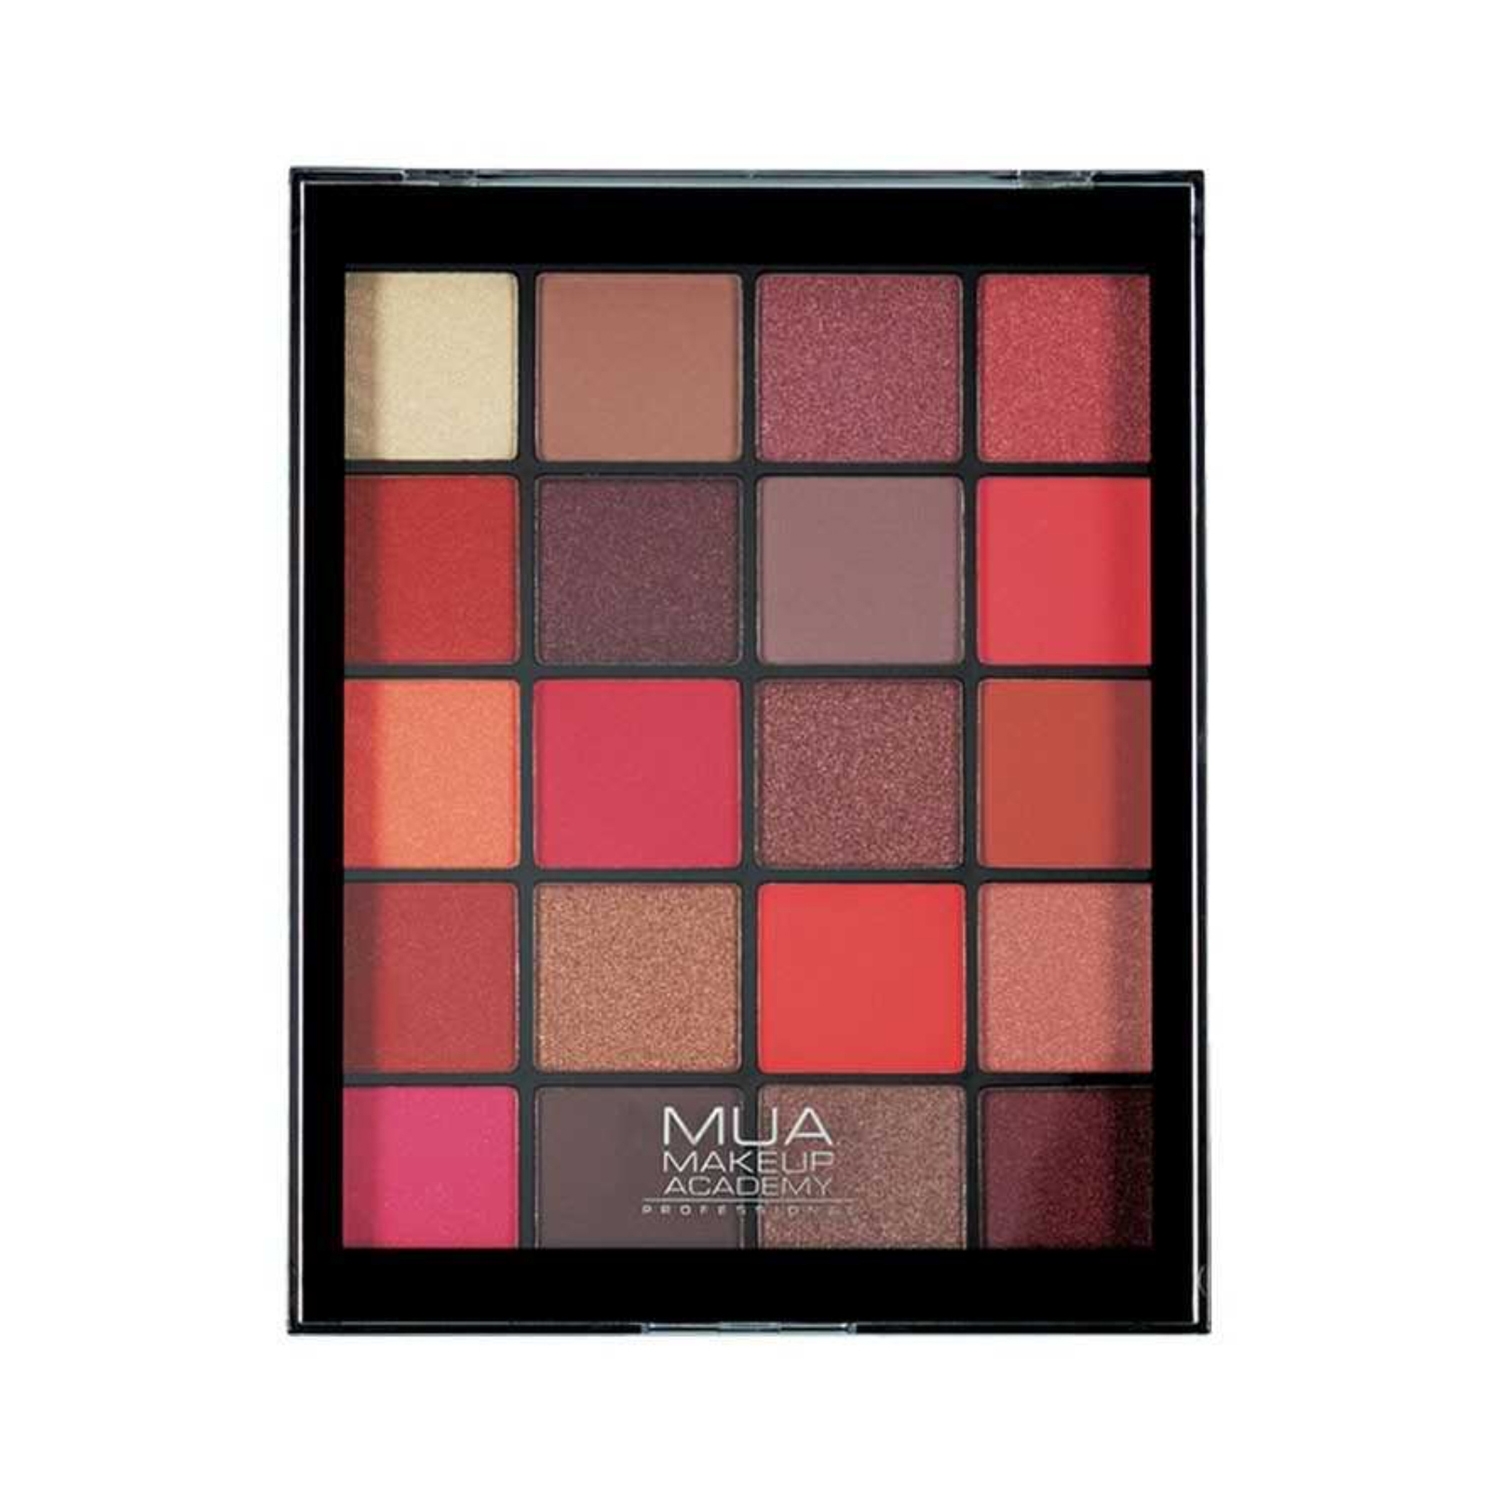 MAKE UP ACADEMY | MAKE UP ACADEMY 20 Shade Eyeshadow Palette - Flame Thrower (22g)